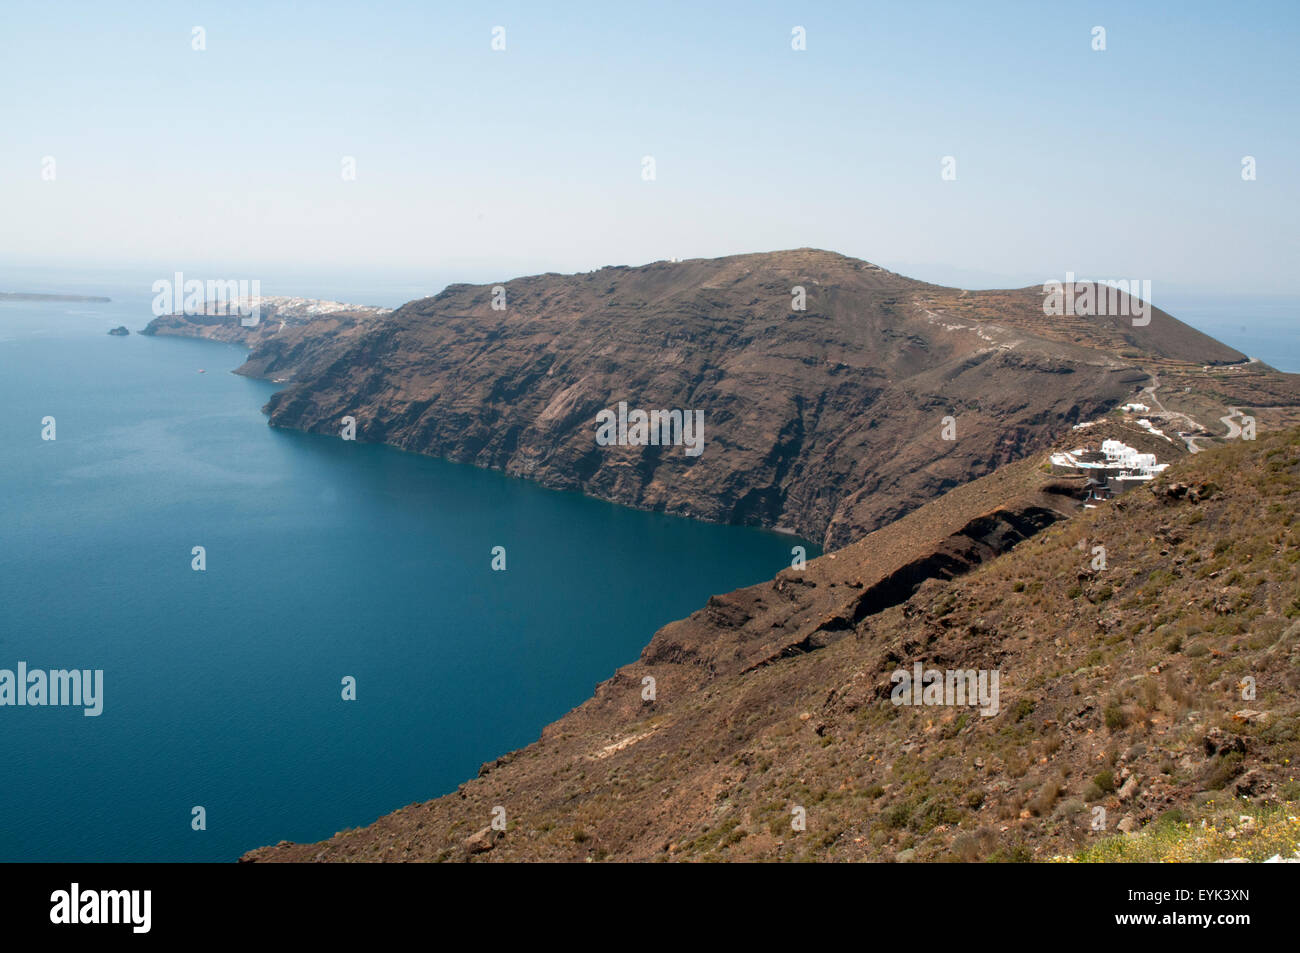 The picturesque villages at the top of this high walls of Santorini caldera are connected by a donkey path along the crater rim. Stock Photo